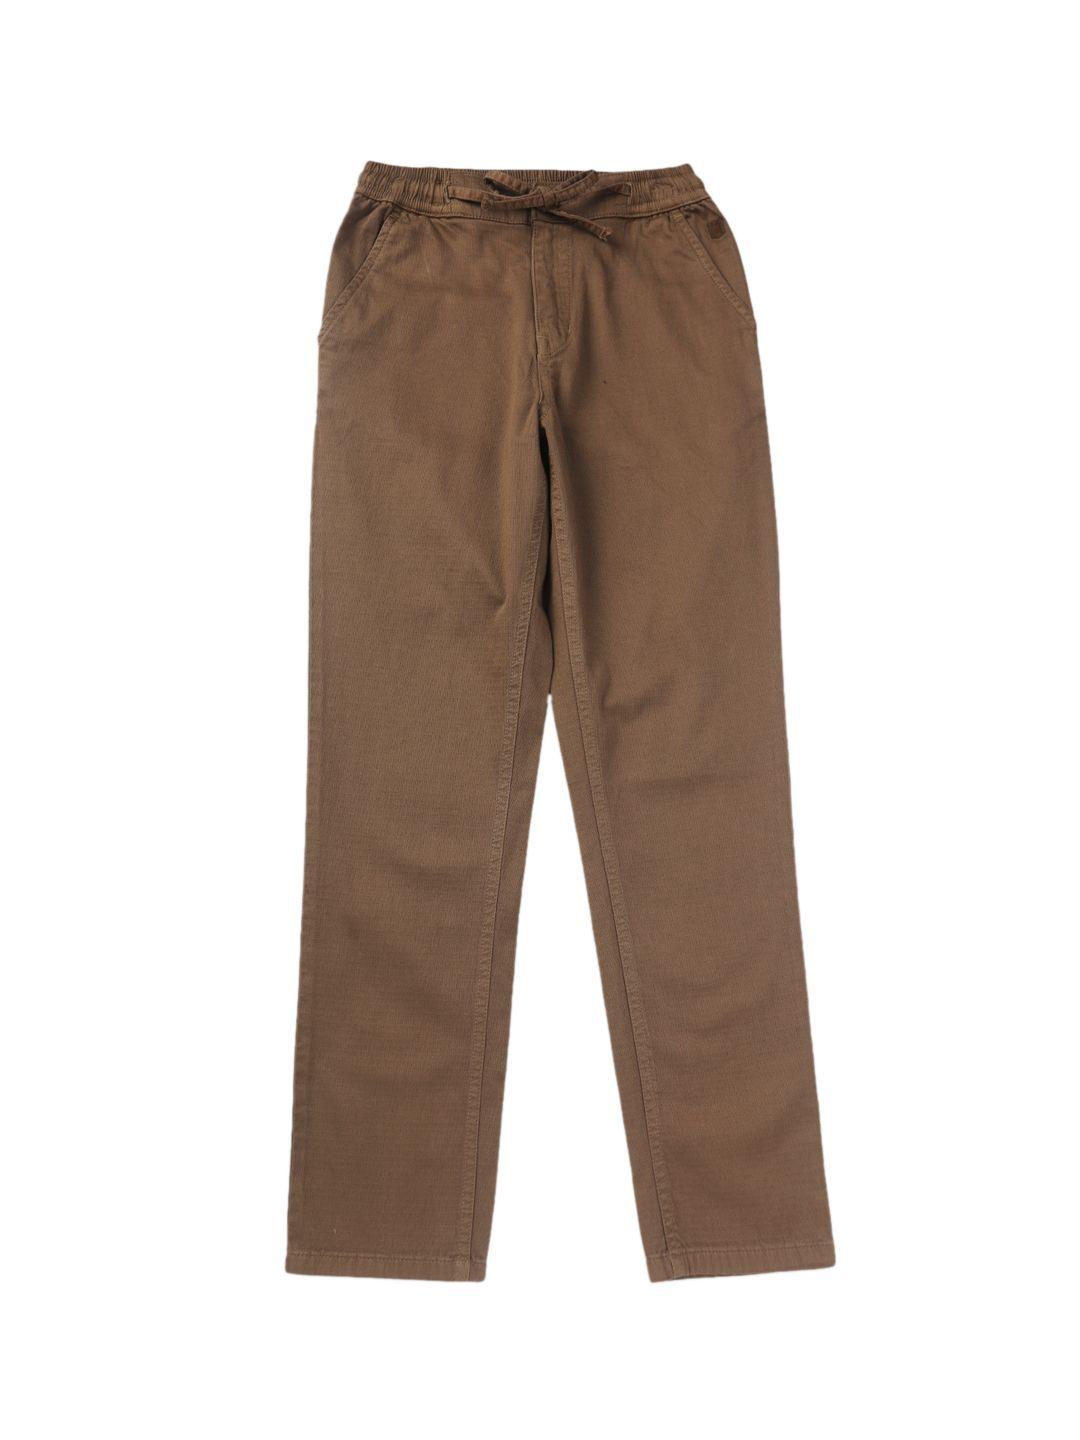 gini and jony boys mid rise cotton chinos trousers